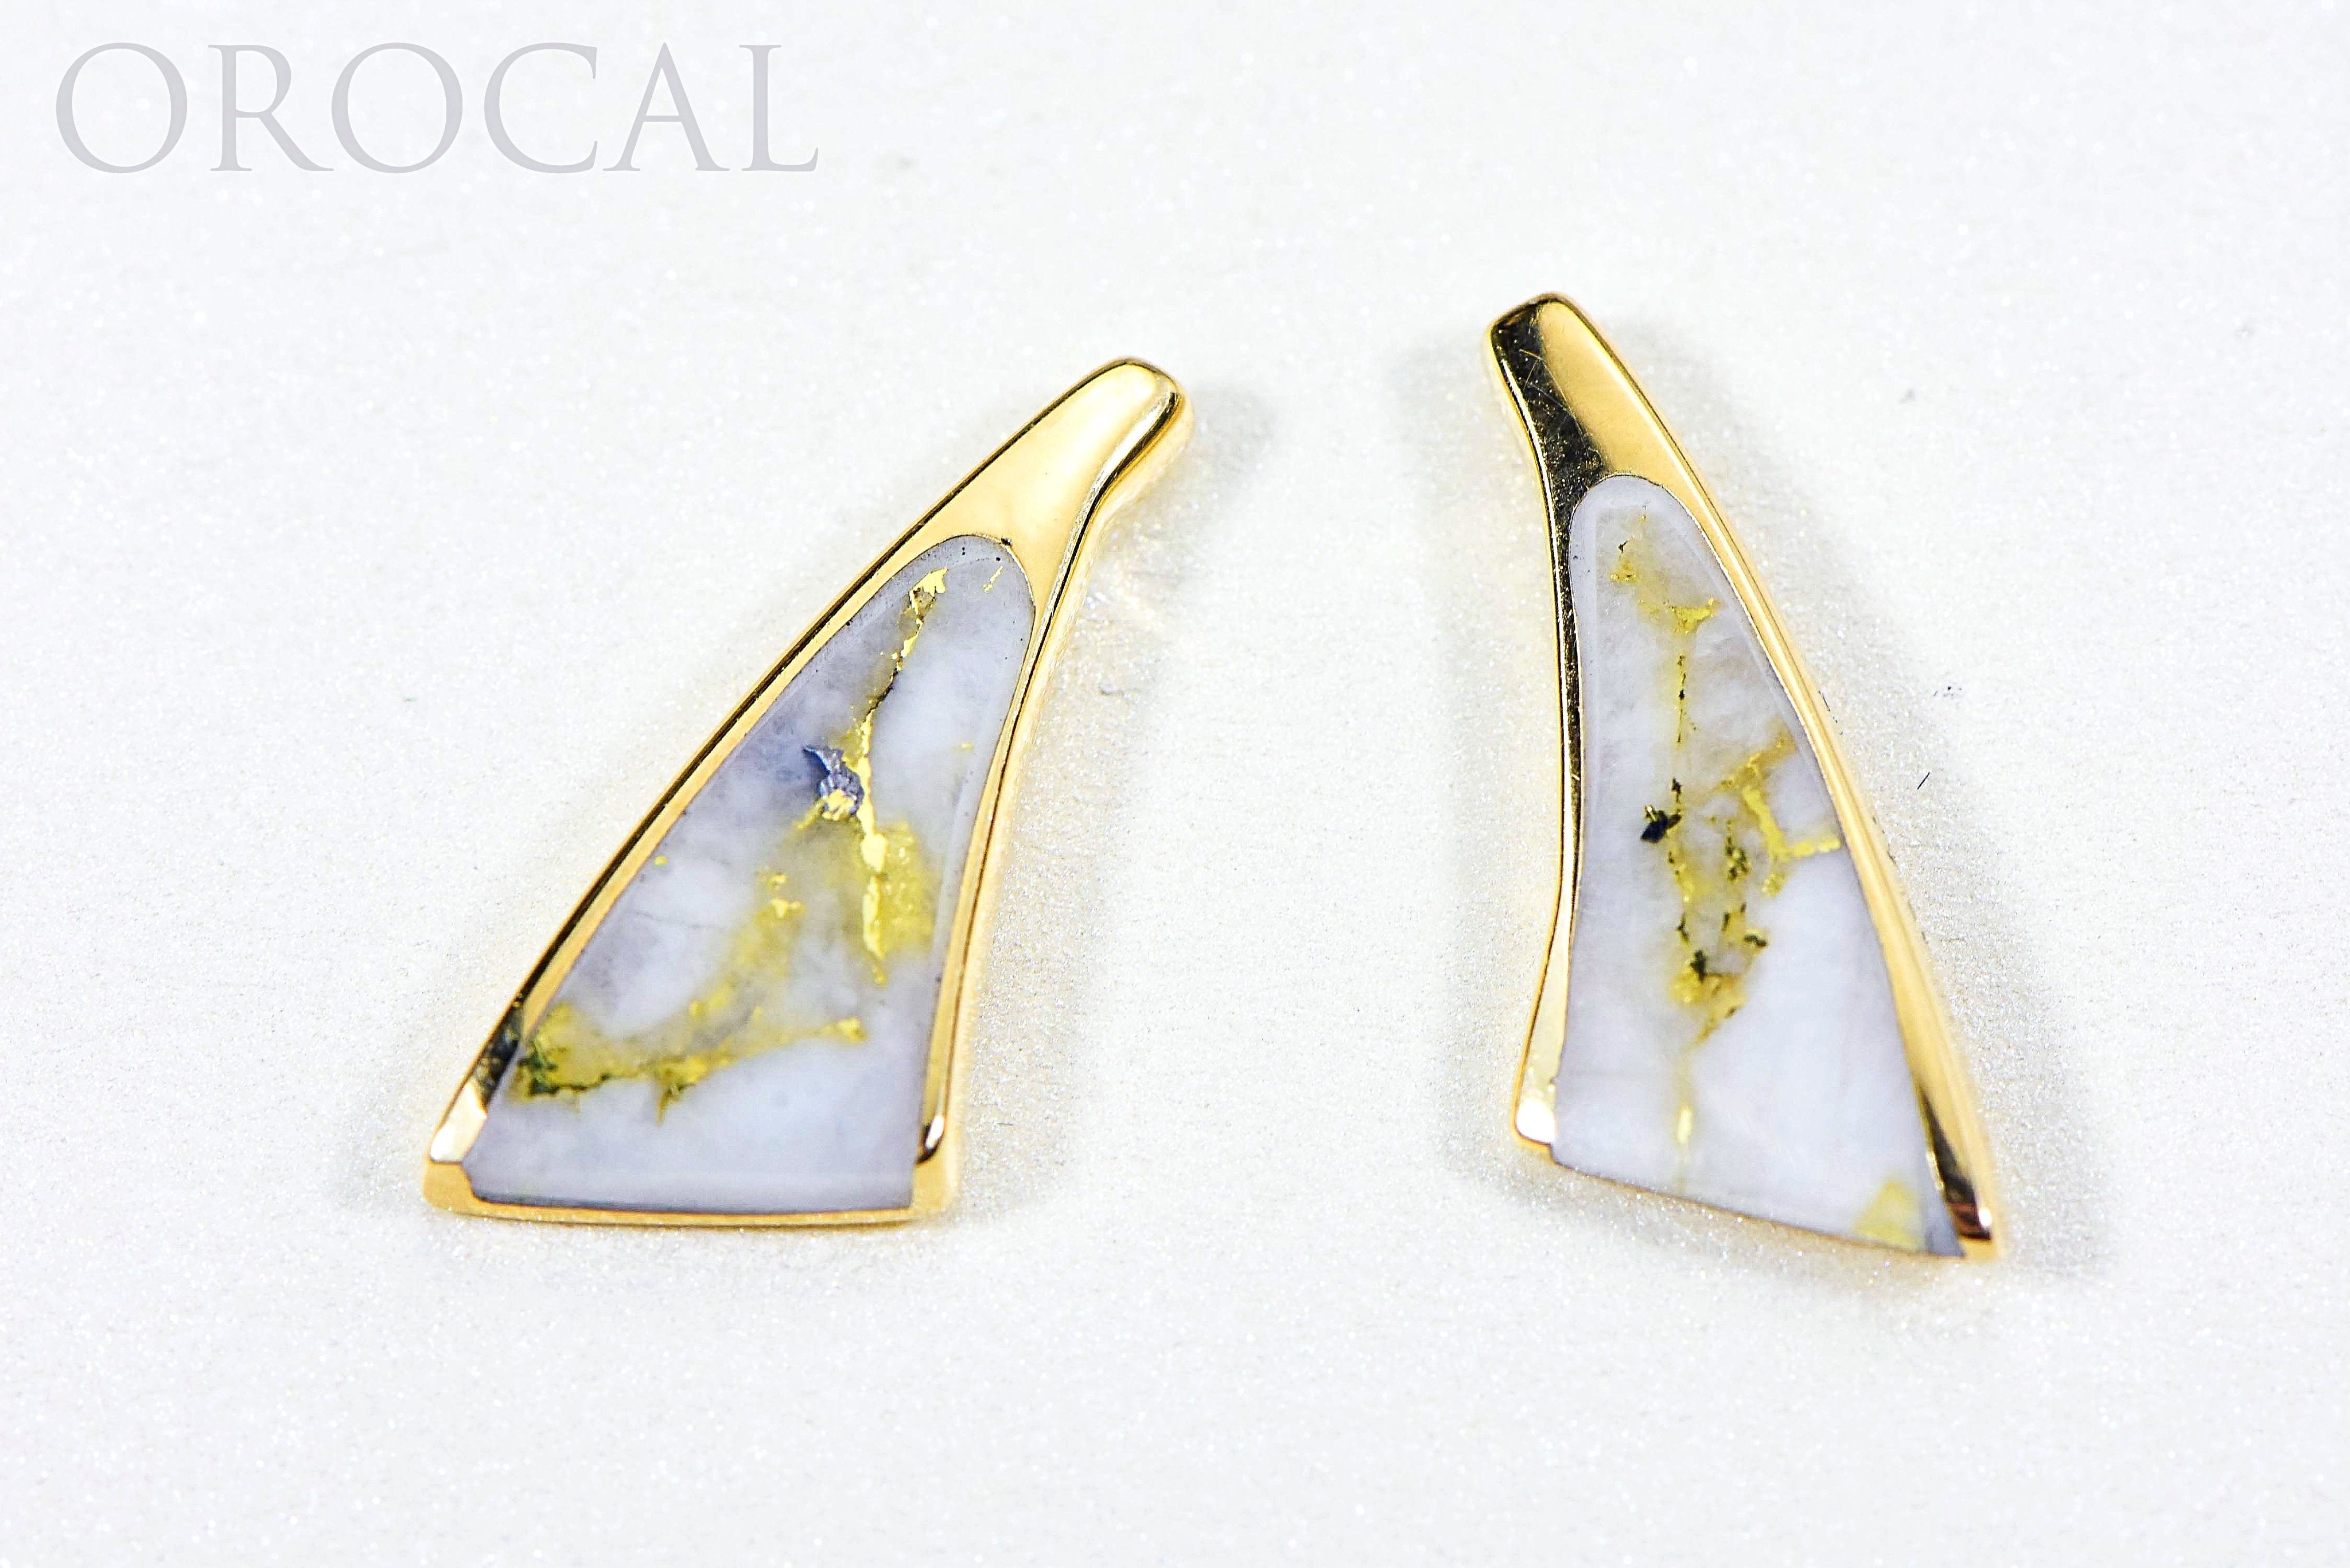 Gold Quartz Earrings "Orocal" EDL8SQ Genuine Hand Crafted Jewelry - 14K Gold Casting